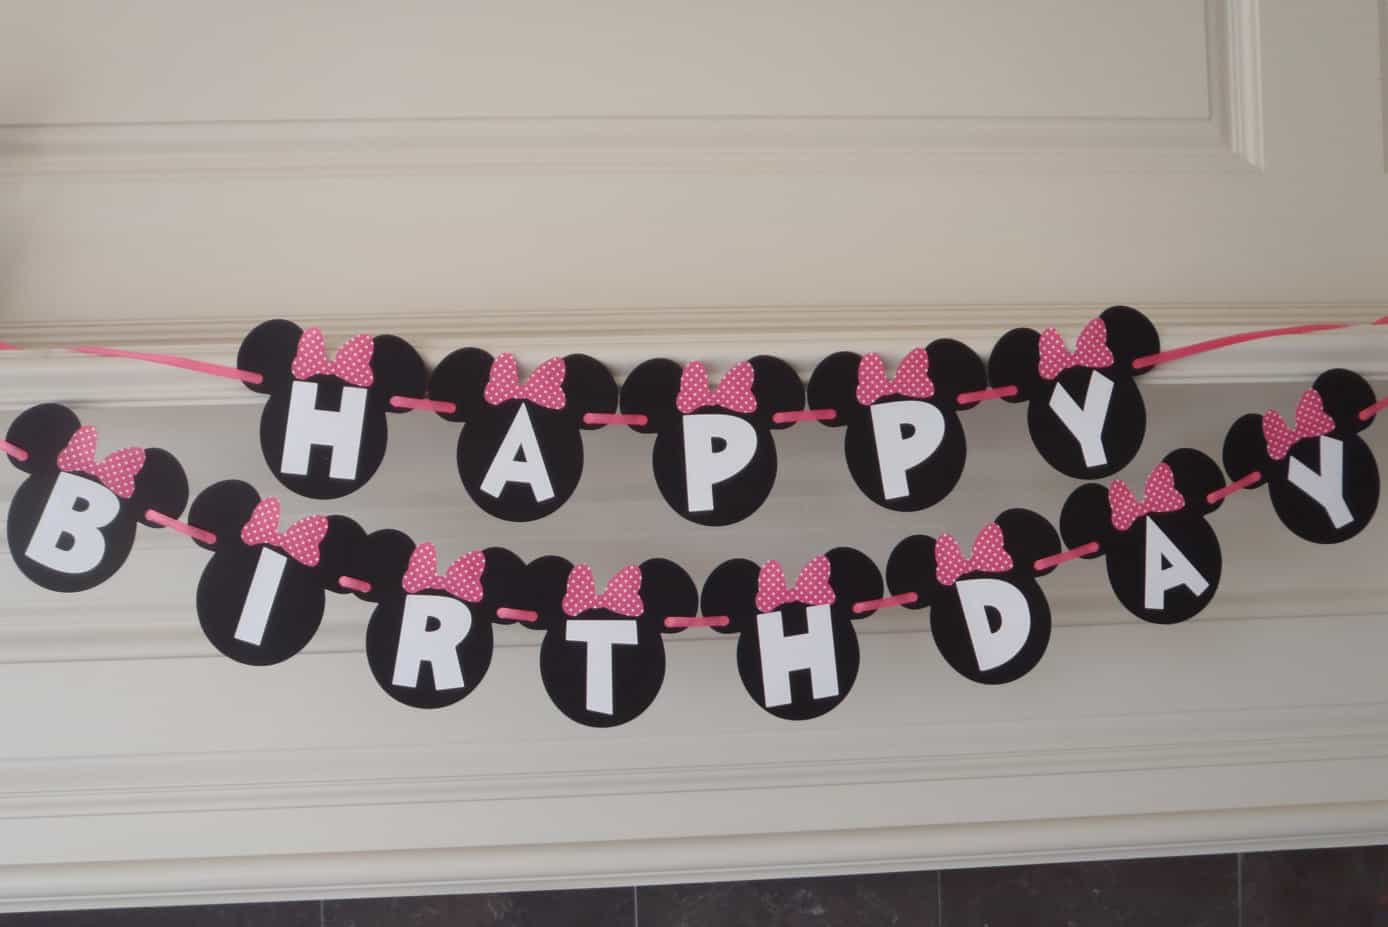 Say It Out Loud Adorable Homemade Birthday Banners